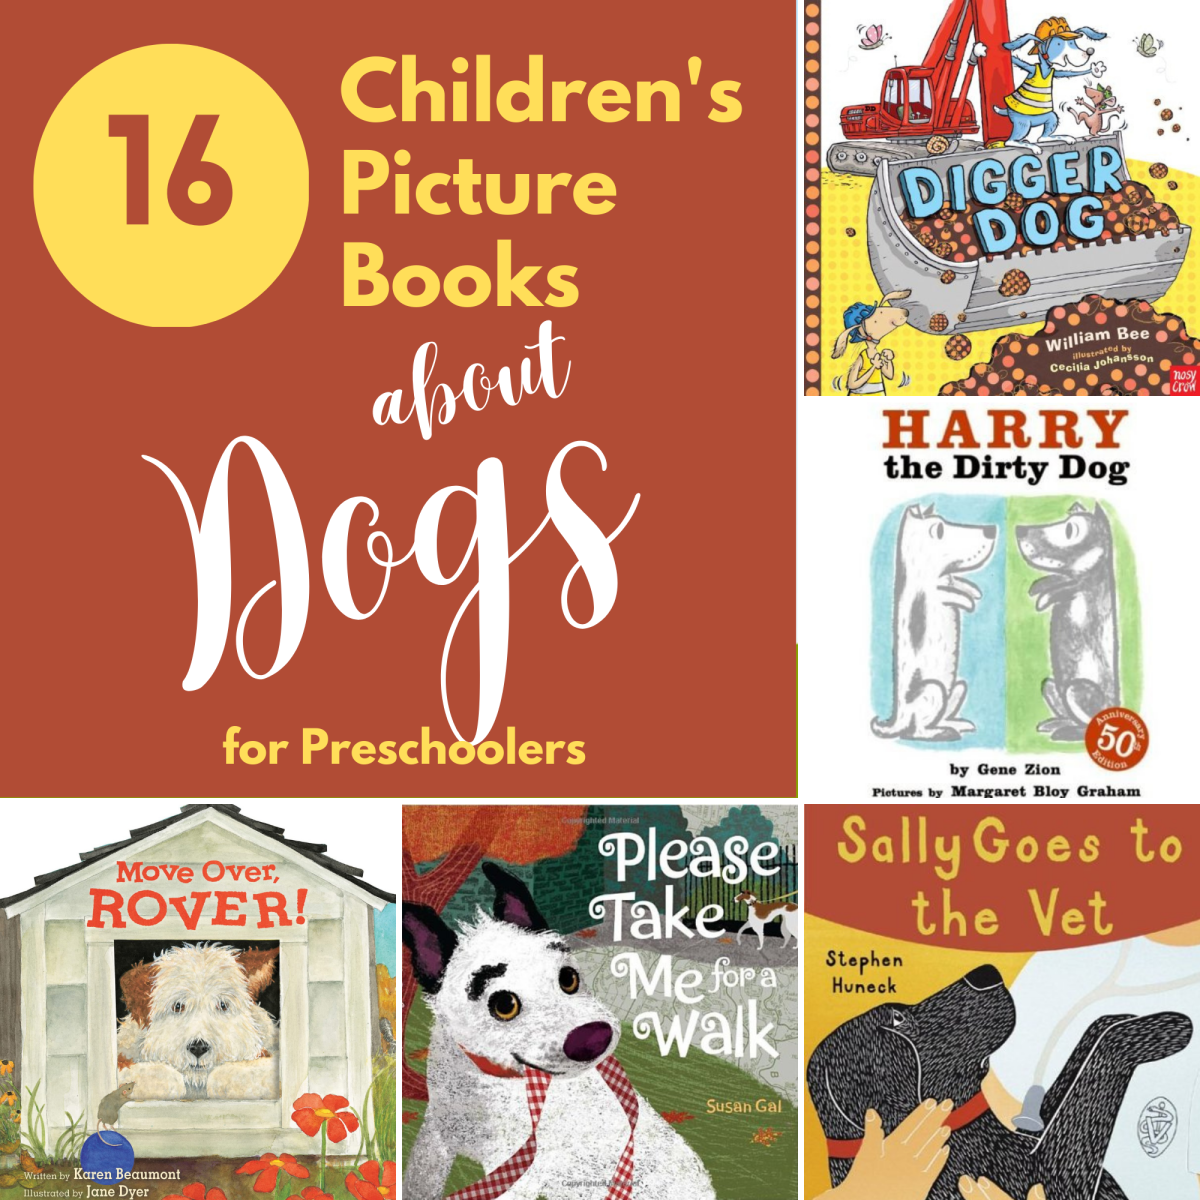 16 Children's Picture Books About Dogs for Preschoolers